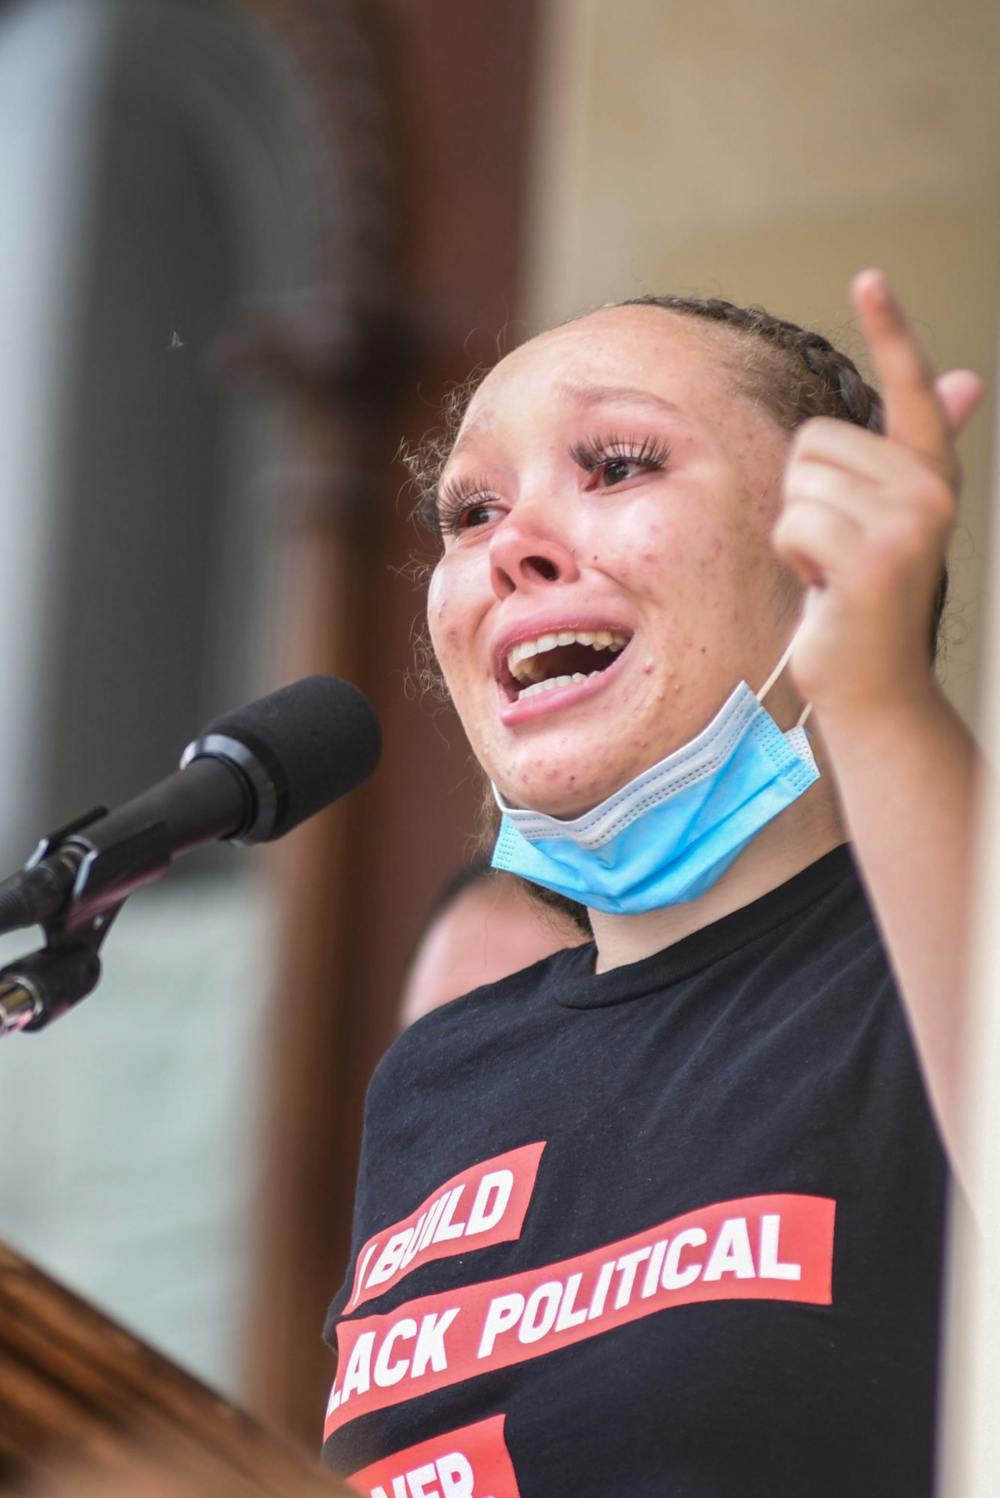 A protester speaks at the protest against police brutality at the Michigan State Capitol on June 10, 2020.